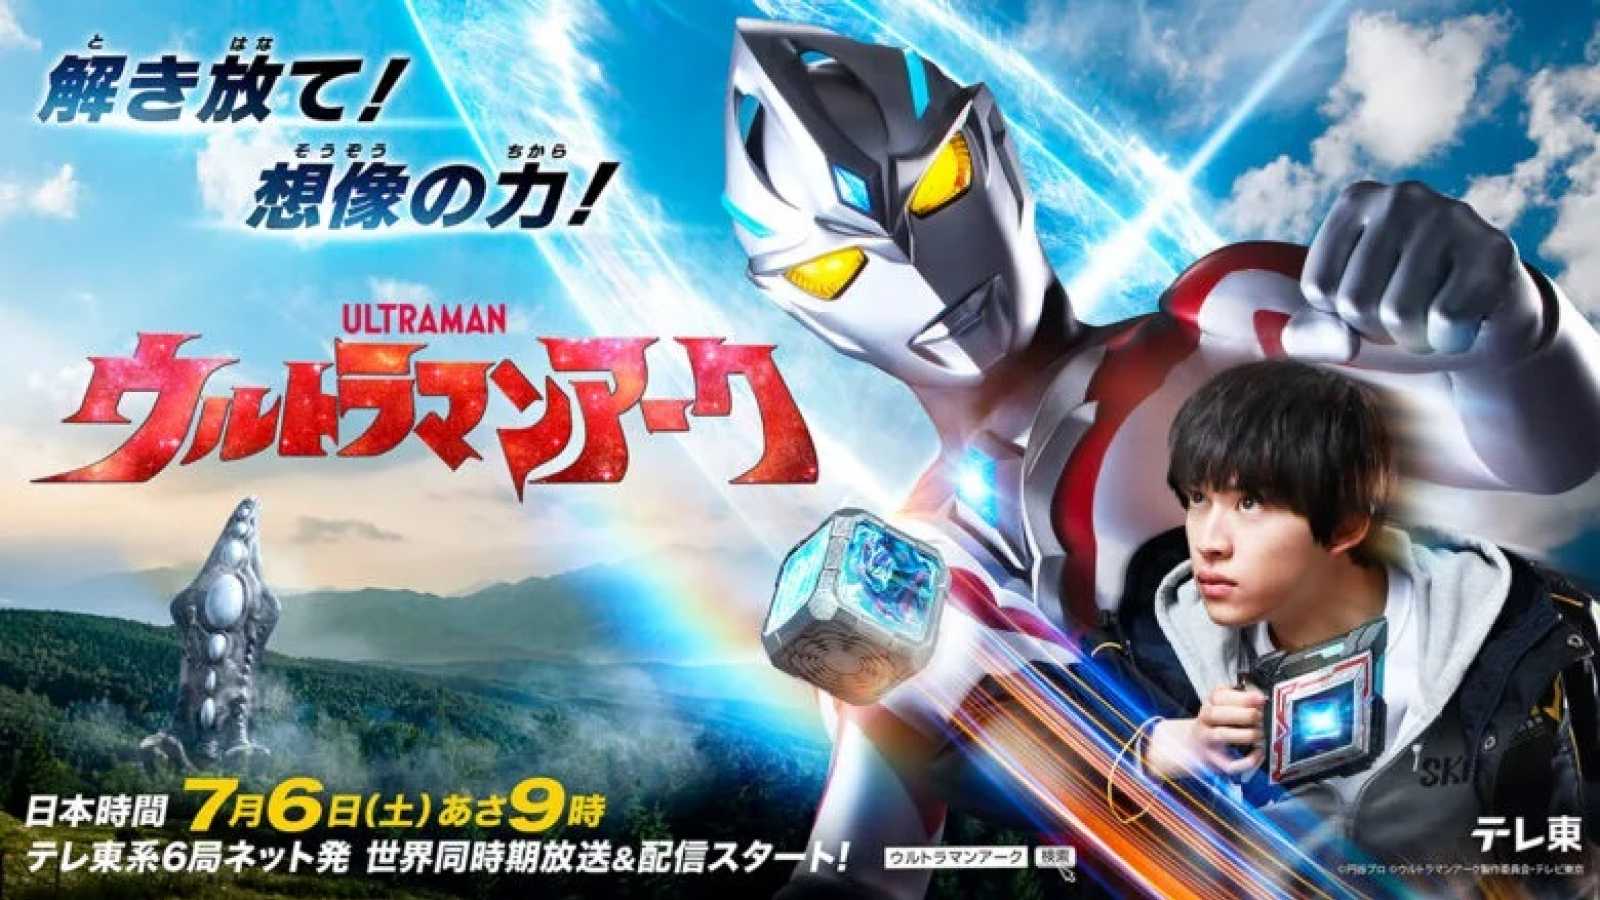 access and ARCANA PROJECT to Perform "Ultraman Arc" Theme Songs © Tsuburaya Productions. Ultraman Ark Production Committee. TV Tokyo. All rights reserved.